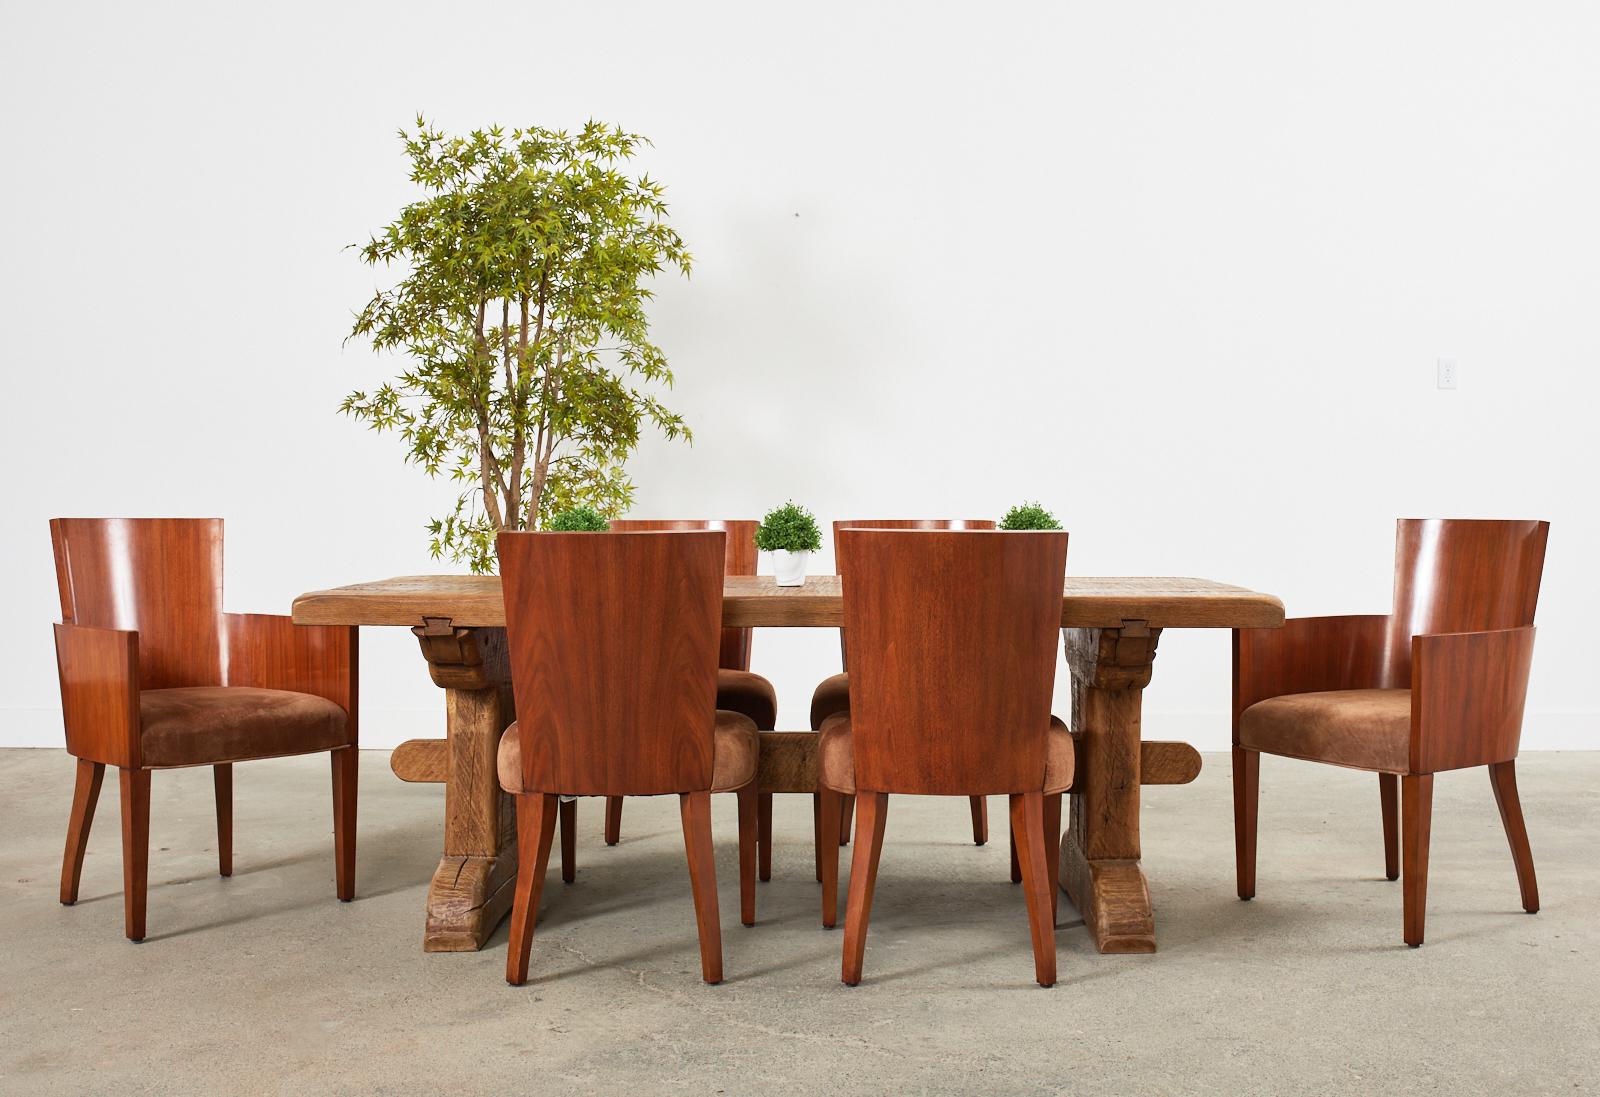 Amazing set of ten art deco style mahogany dining chairs designed by Ralph Lauren for Henredon. From Lauren's modern Hollywood collection that paid homage to early Hollywood glamour. The set consists of eight side chairs and two host armchairs